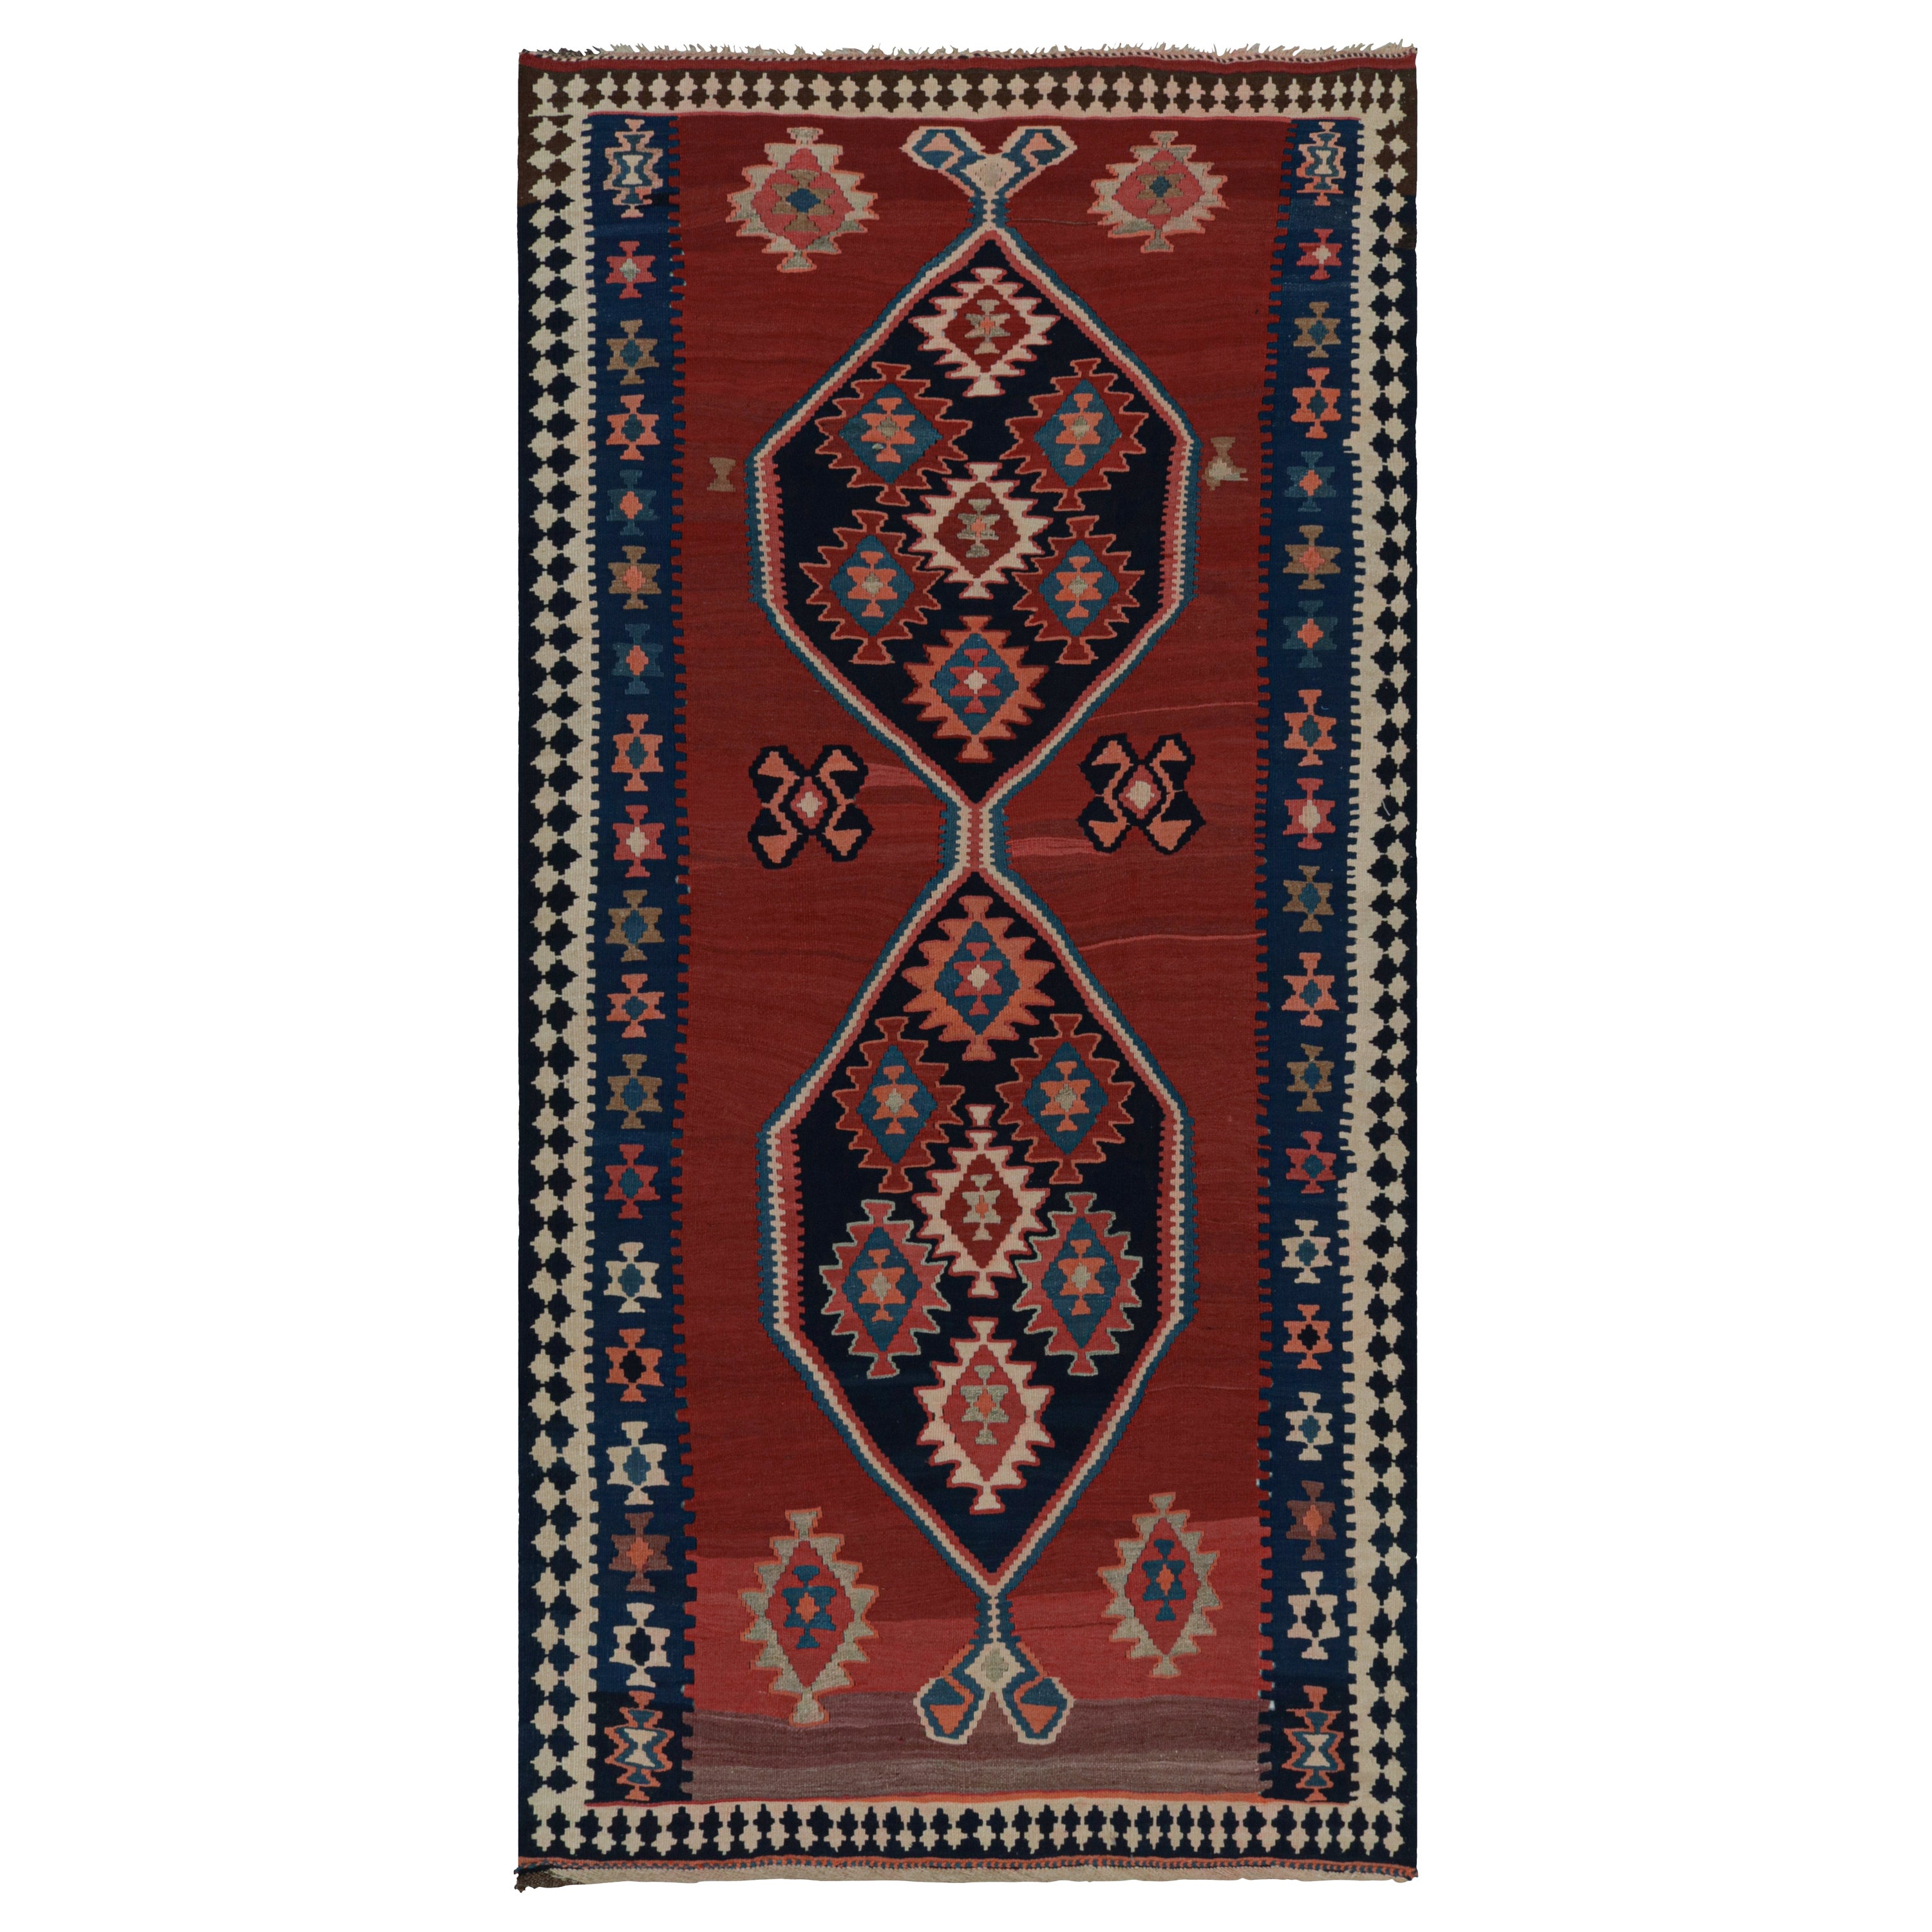 Vintage Afghani Tribal Kilim rug, with Open Field and Medallion from Rug & Kilim For Sale